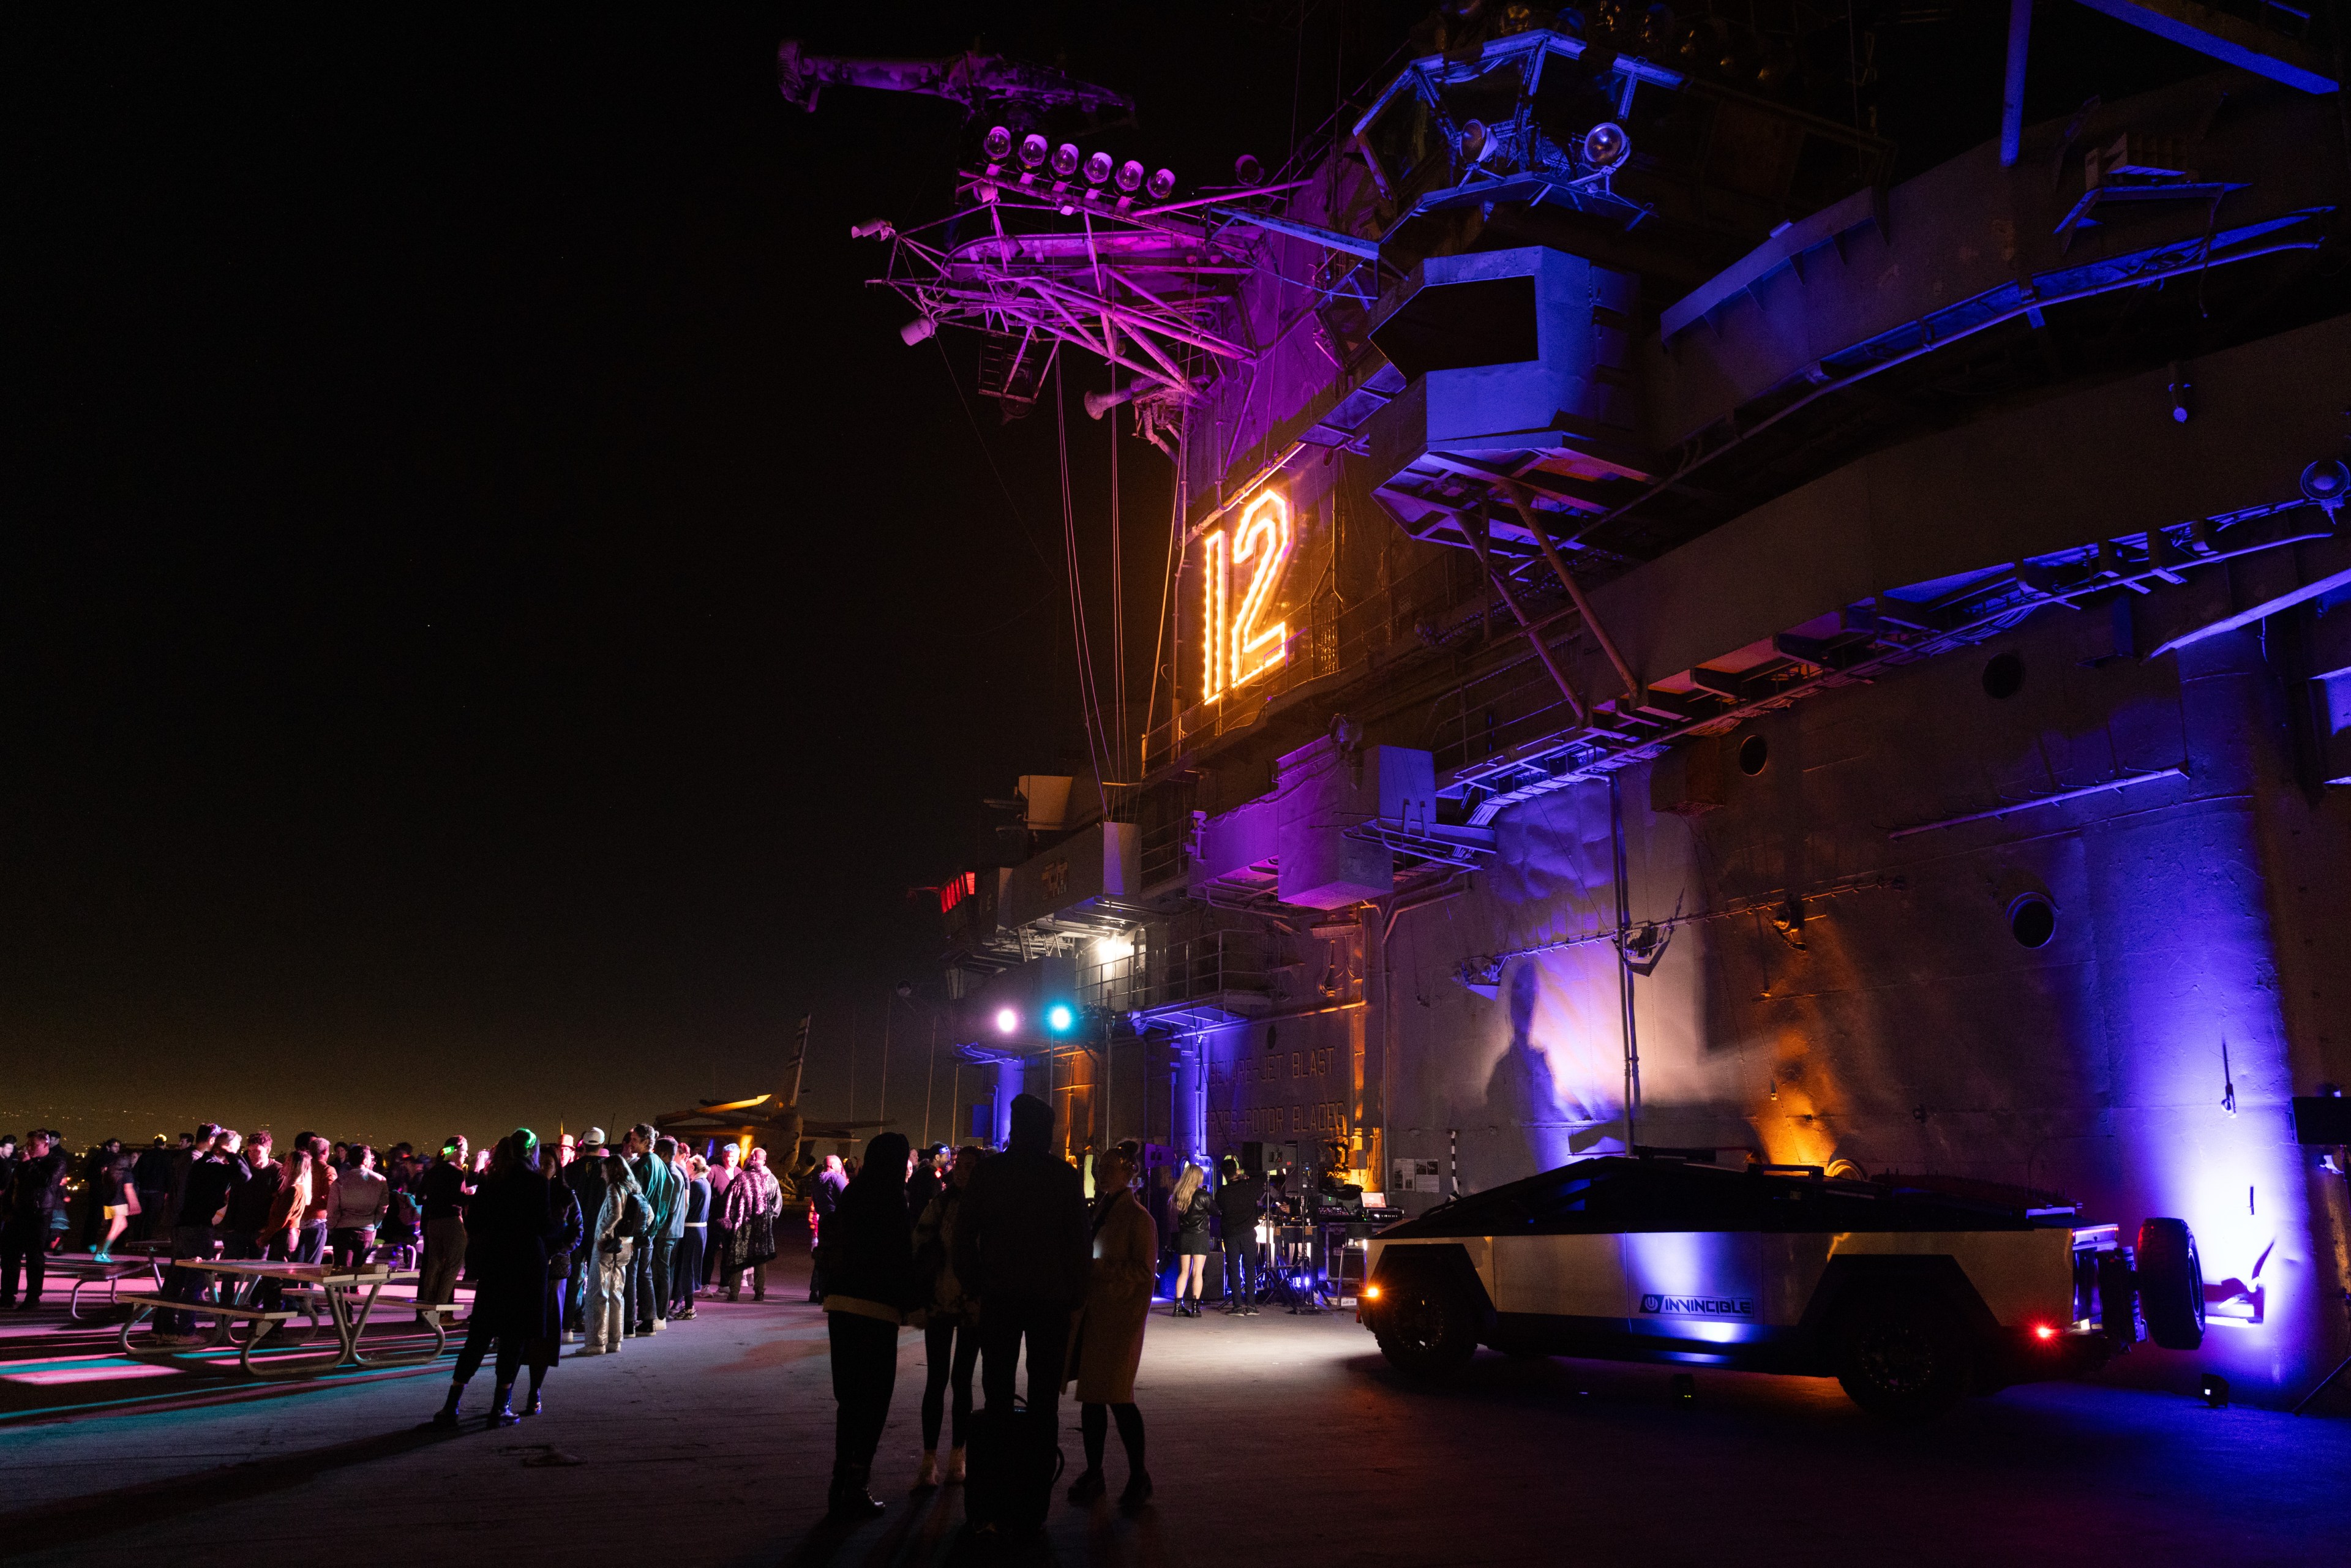 People gather at night on a ship's deck with colorful lights. A lit &quot;12&quot; is displayed on the structure, and a distinctively designed vehicle is illuminated nearby.